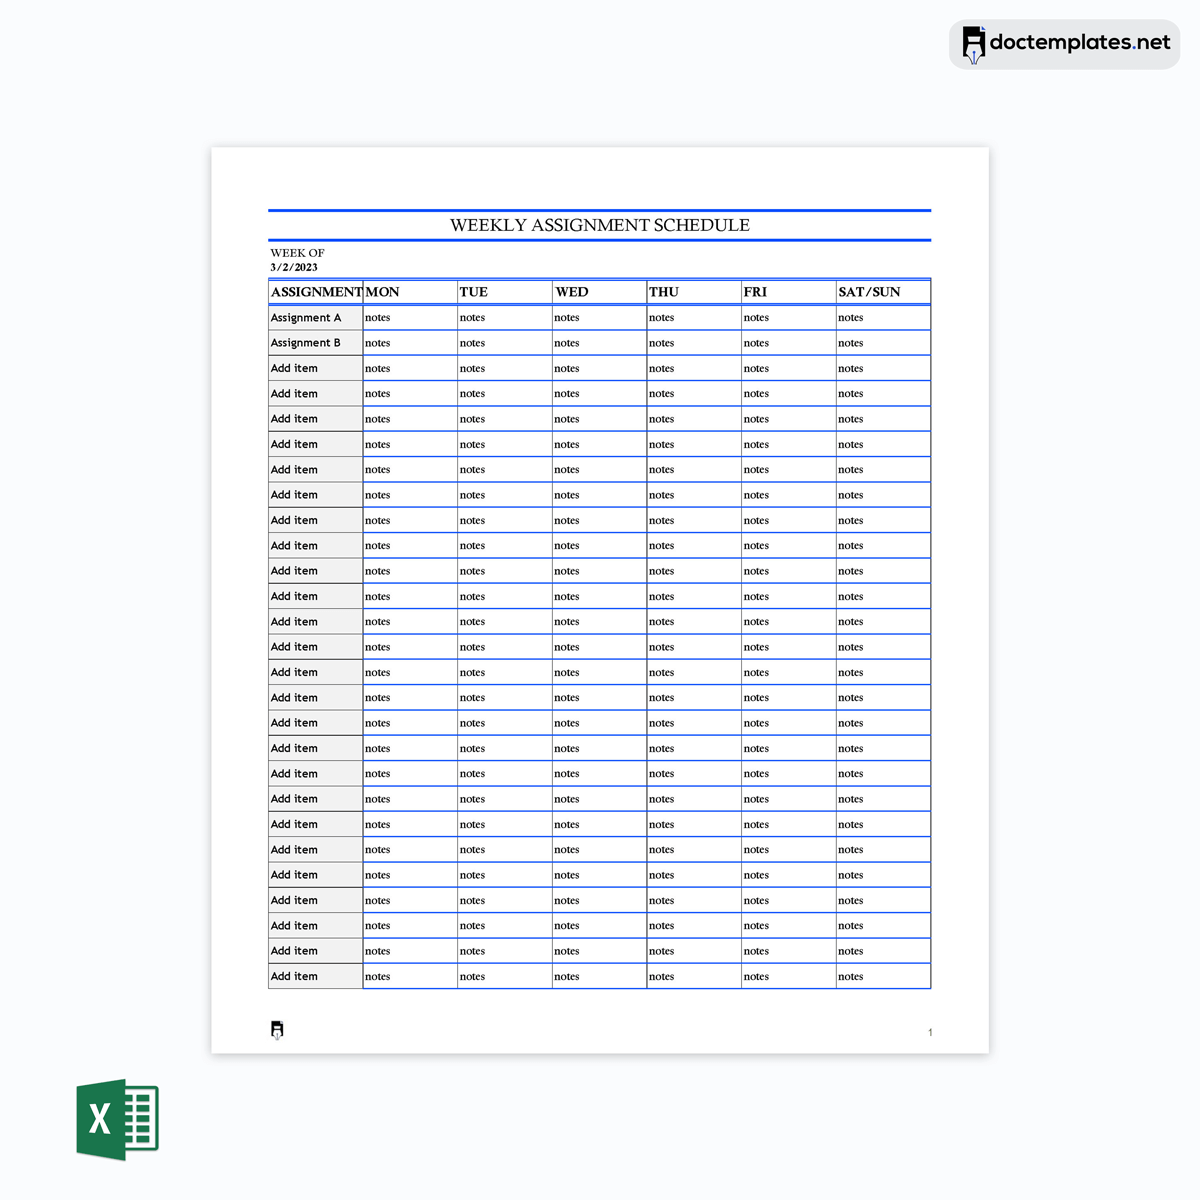 Monthly schedule template
-5